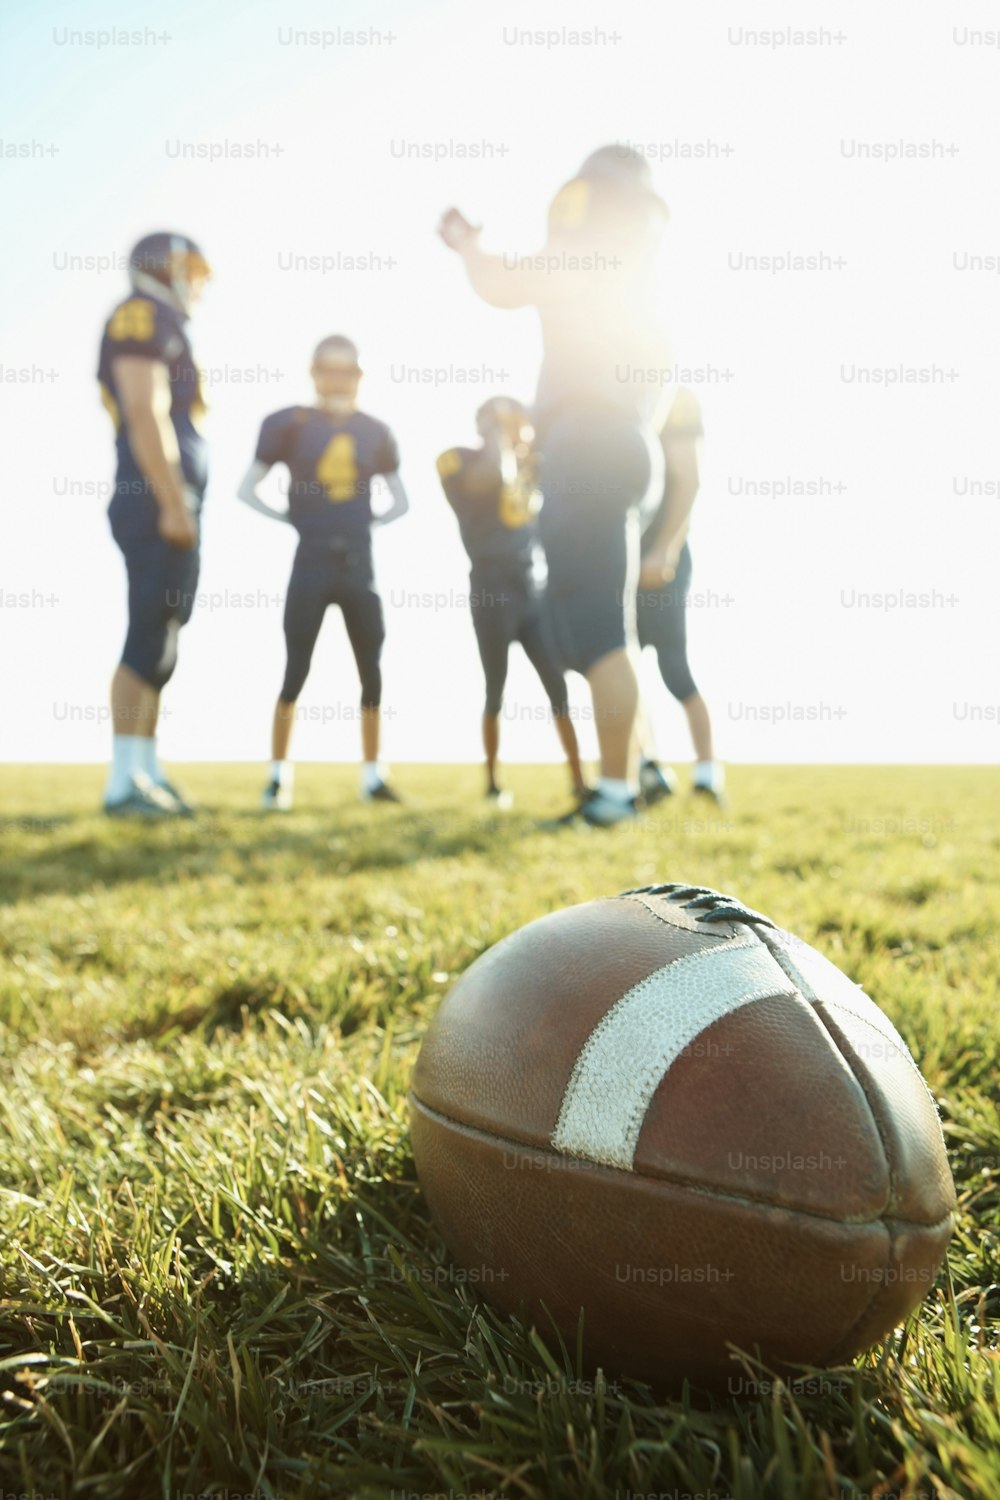 Close-up of an American football lying on a grass field with players in the background